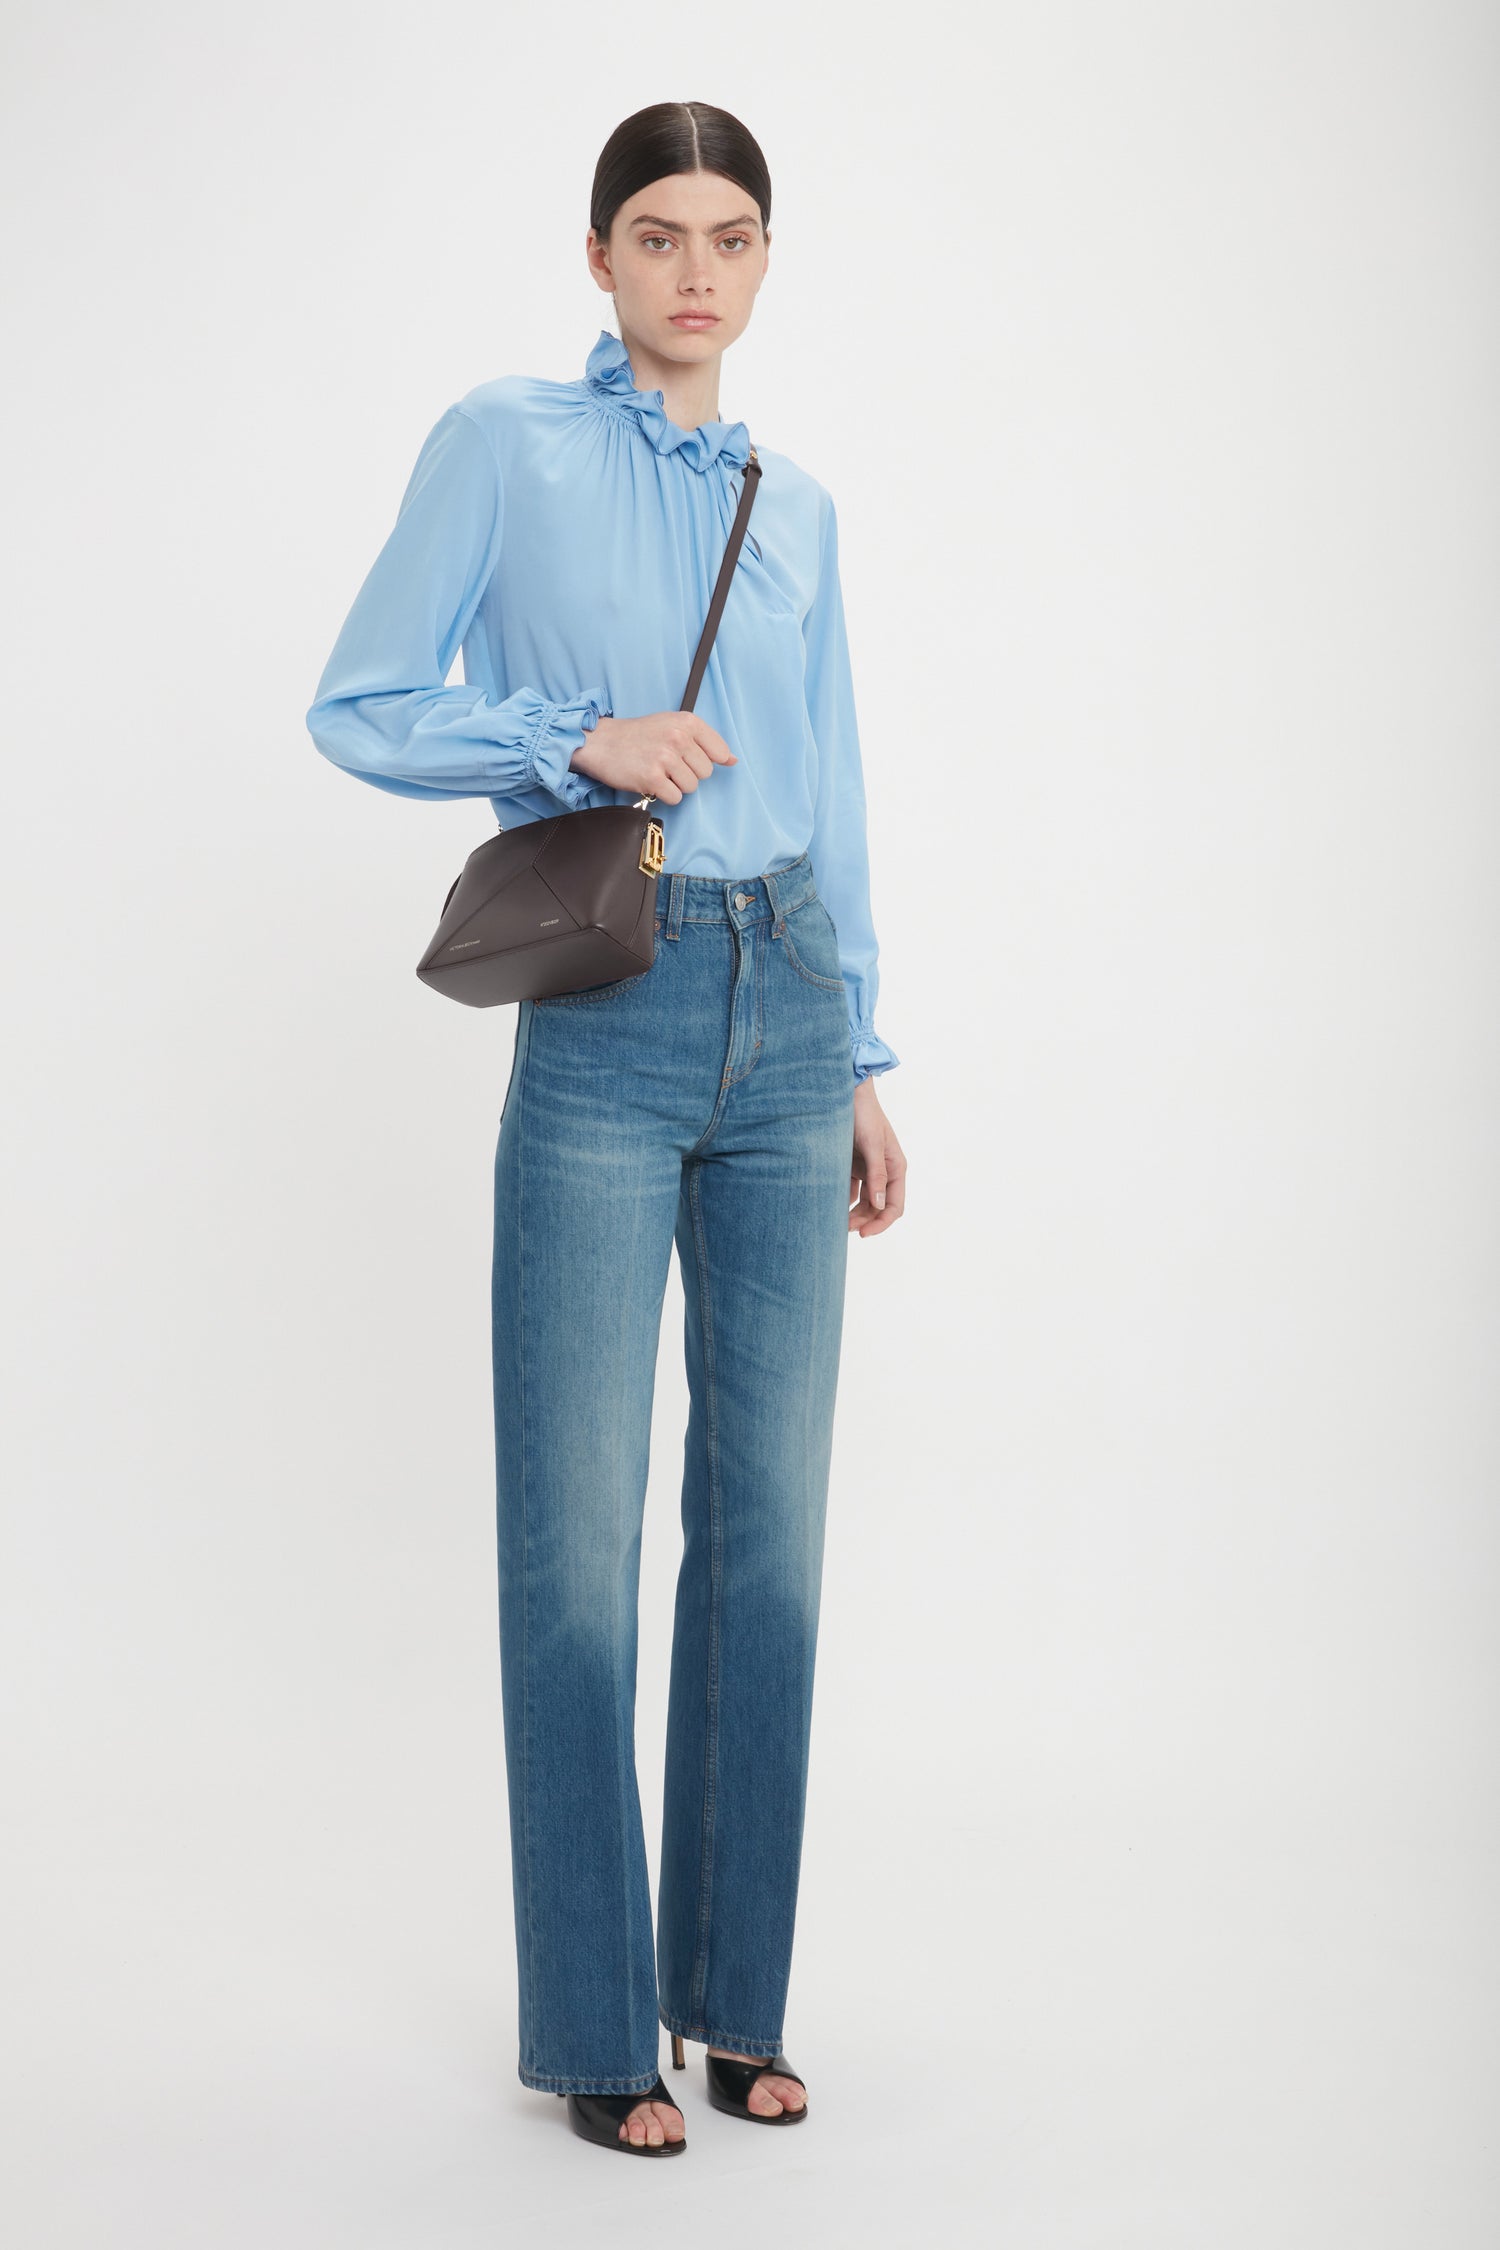 A person wearing a light blue blouse, blue jeans, black open-toe heels, and an Exclusive Victoria Crossbody Bag In Brown Leather by Victoria Beckham with its signature V shape in elegant calf leather stands against a plain white background.